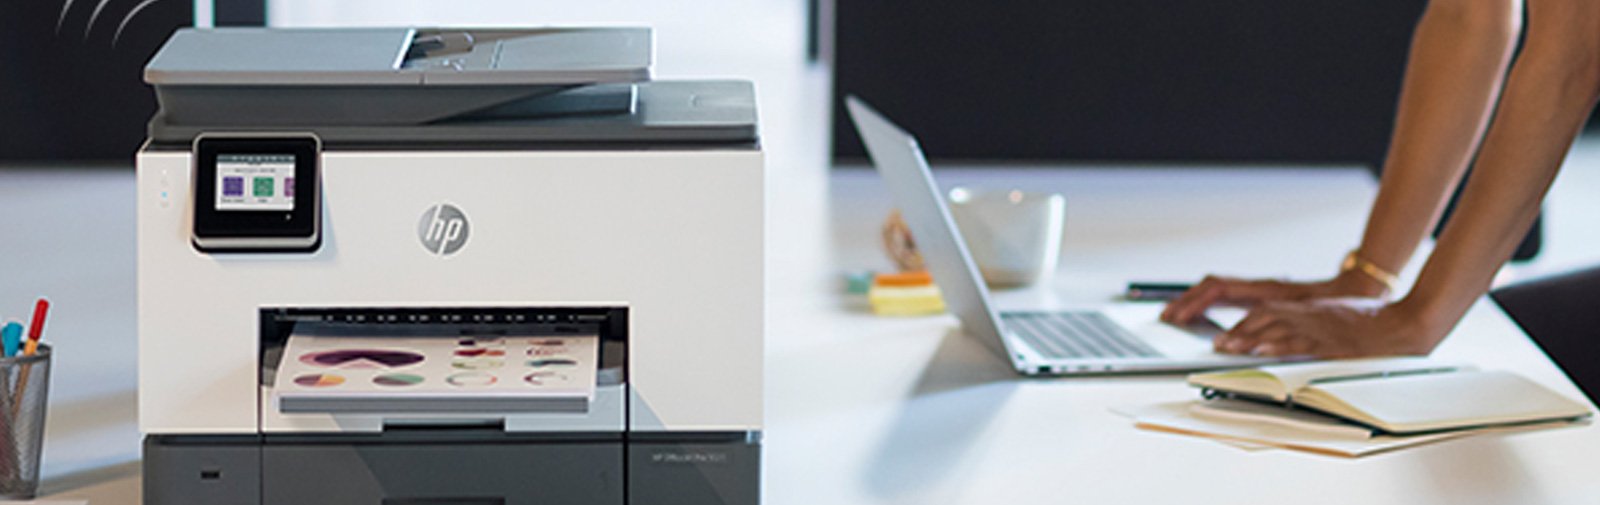 Verify if the printer model is compatible with your operating system.
If not compatible, consider choosing a different printer model.